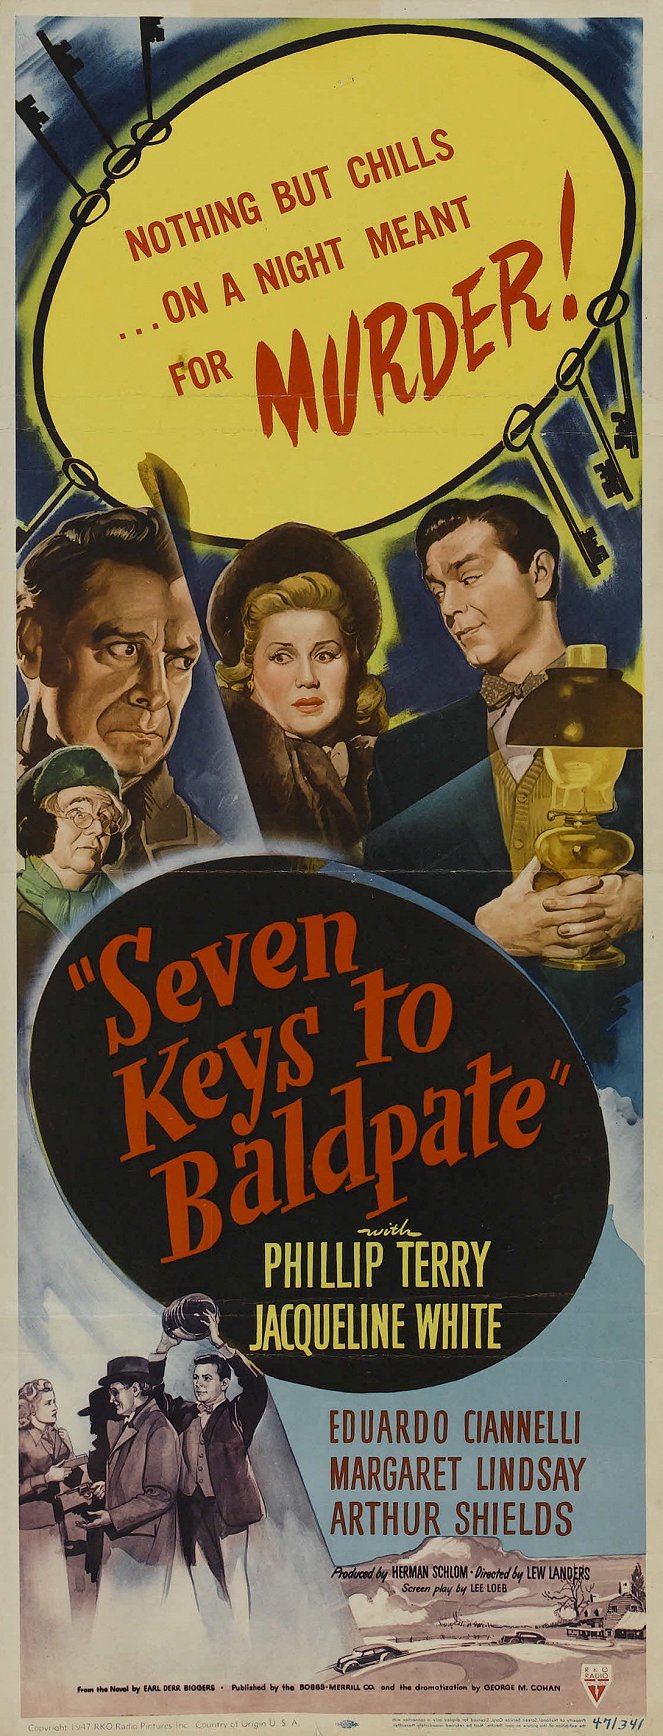 Seven Keys to Baldpate - Posters